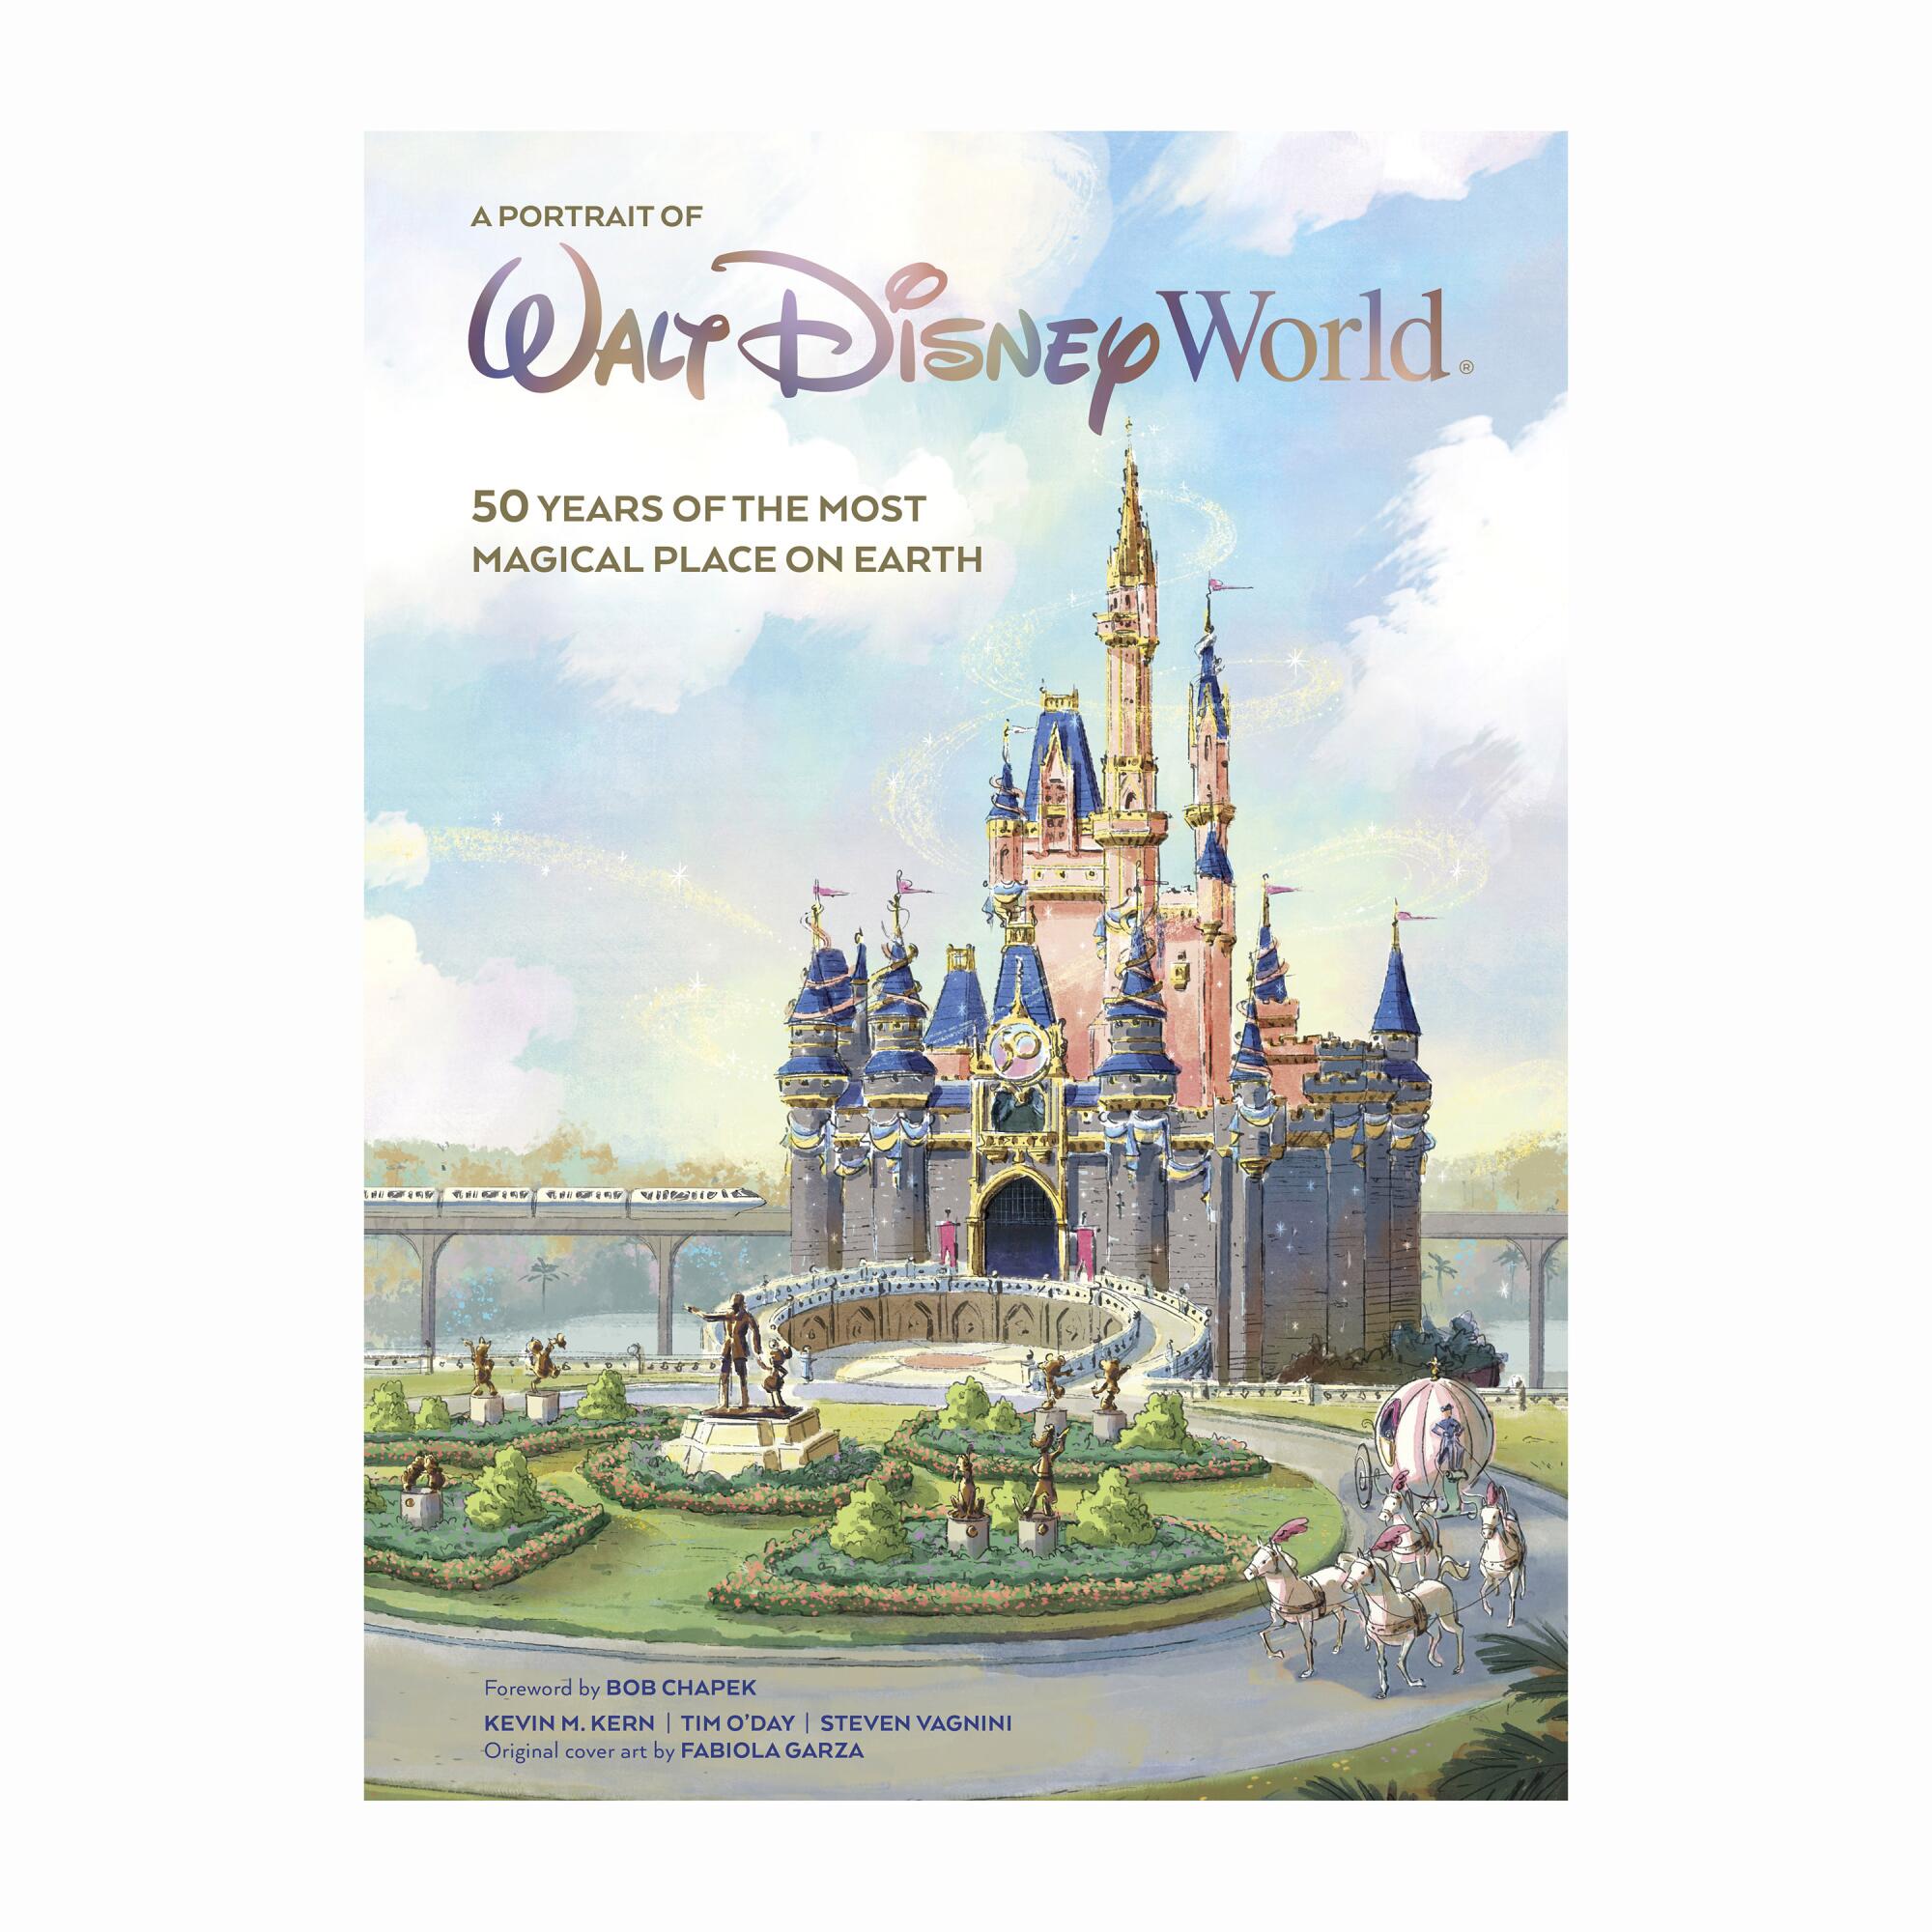 The front cover of "A Portrait of Walt Disney World."